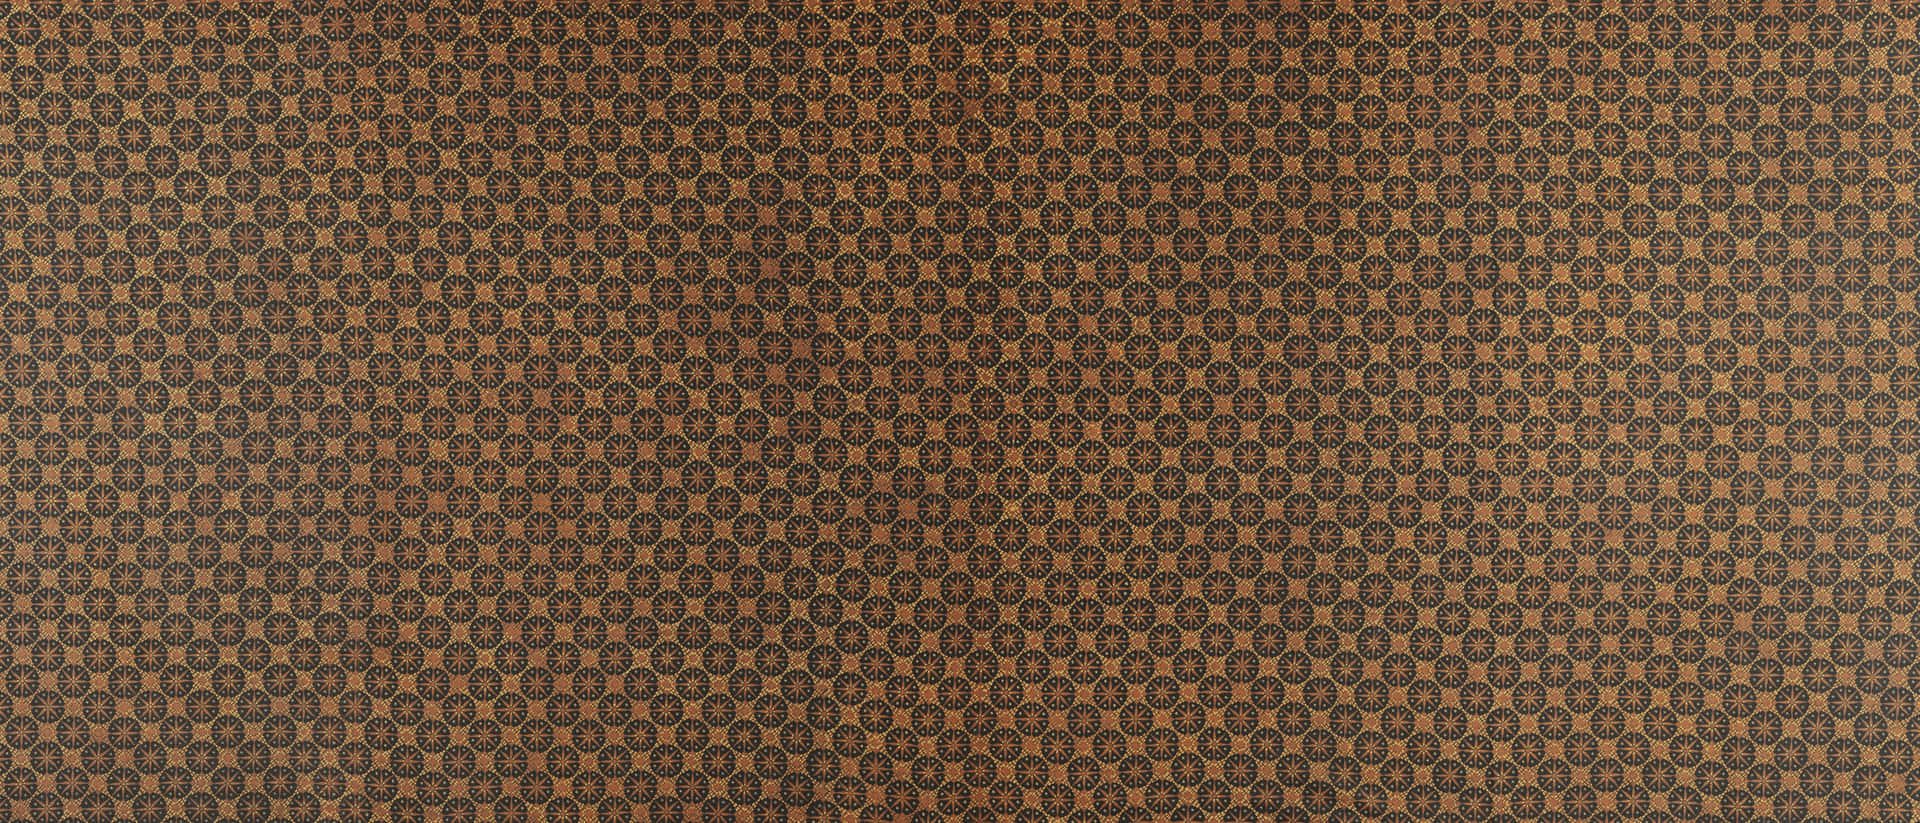 Fabric Texture With Circle Pattern Wallpaper